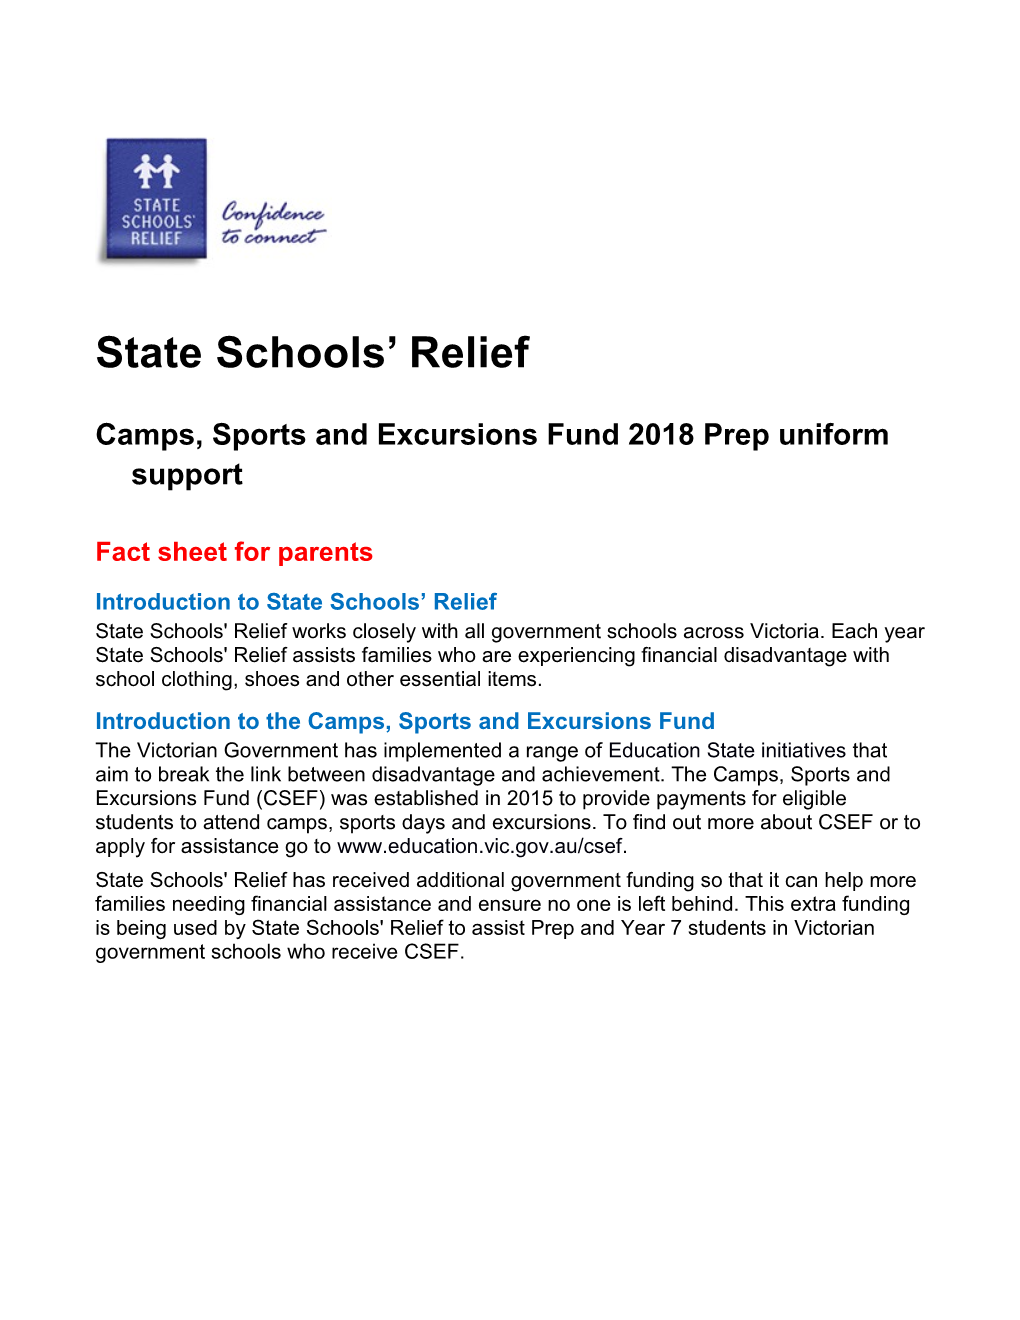 Camps, Sports and Excursions Fund 2018 Prepuniform Support